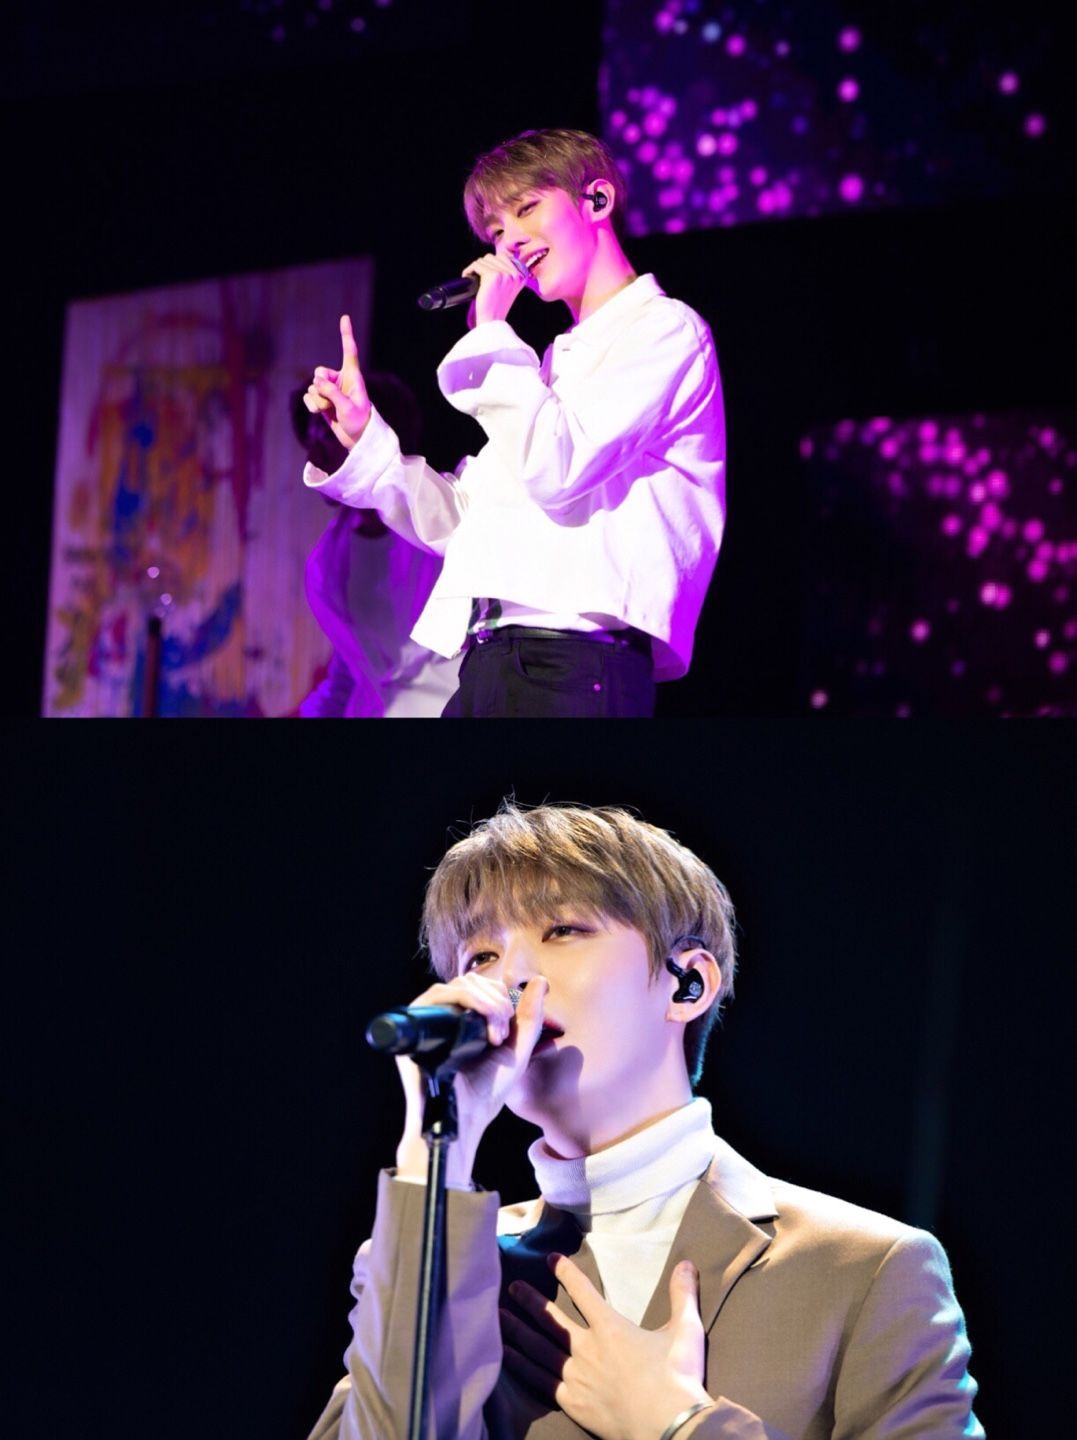 Yoon Ji-sung opened the first domestic fan meeting 2019 Yoon Ji-sung 1st FAN MEETING: Aside in Seoul held at Blue Square Imarket Hall between the 23rd and 24th.Following the solo debut album I am laughing again, I have played all the songs live from CLOVER, In the Rain, Why I am not, Comma, Wind You.In 83 seconds, there was also a Yoon Ji Sung tutorial corner to answer 38 questions, and Yoon Ji Sung laughed at the TMI related to him.I constantly communicated with fans through various corners such as Solo Singer Yoon Ji-sung, which conveys the solo album work and the current situation, Miribo is a full-fledged rice ball point, which is a reality that fans imagine, and Yoon Ji-sungs Bob Al The Radio, which is a voice message sent by fans.Kim Jae-hwan and Lee Dae-hwi, who worked together as Wanna One, appeared as surprise guests and had time to check the facts.They ran to a month to support Yoon Ji-sungs first solo fan meeting and boasted a special loyalty.In addition, Yoon Ji-sung showed off his unique fan love by conducting a reverse-action event for all fans who visited the first solo fan meeting site.For the fans who gathered to see themselves, they prepared their own membership cards, photo cards, and mirror sets for Bobal (Yoon Ji-sungs fan club name) and were impressed.Yoon Ji-sung, who has successfully completed his first solo fan meeting in Seoul, plans to continue his Asian fan meeting tour with eight cities in seven countries including Taiwan, Singapore, Malaysia, Tokyo, Osaka and Bangkok starting from Macau on the 2nd of next month.Yoon Ji-sung has been active in his first solo album Aside on the 20th.